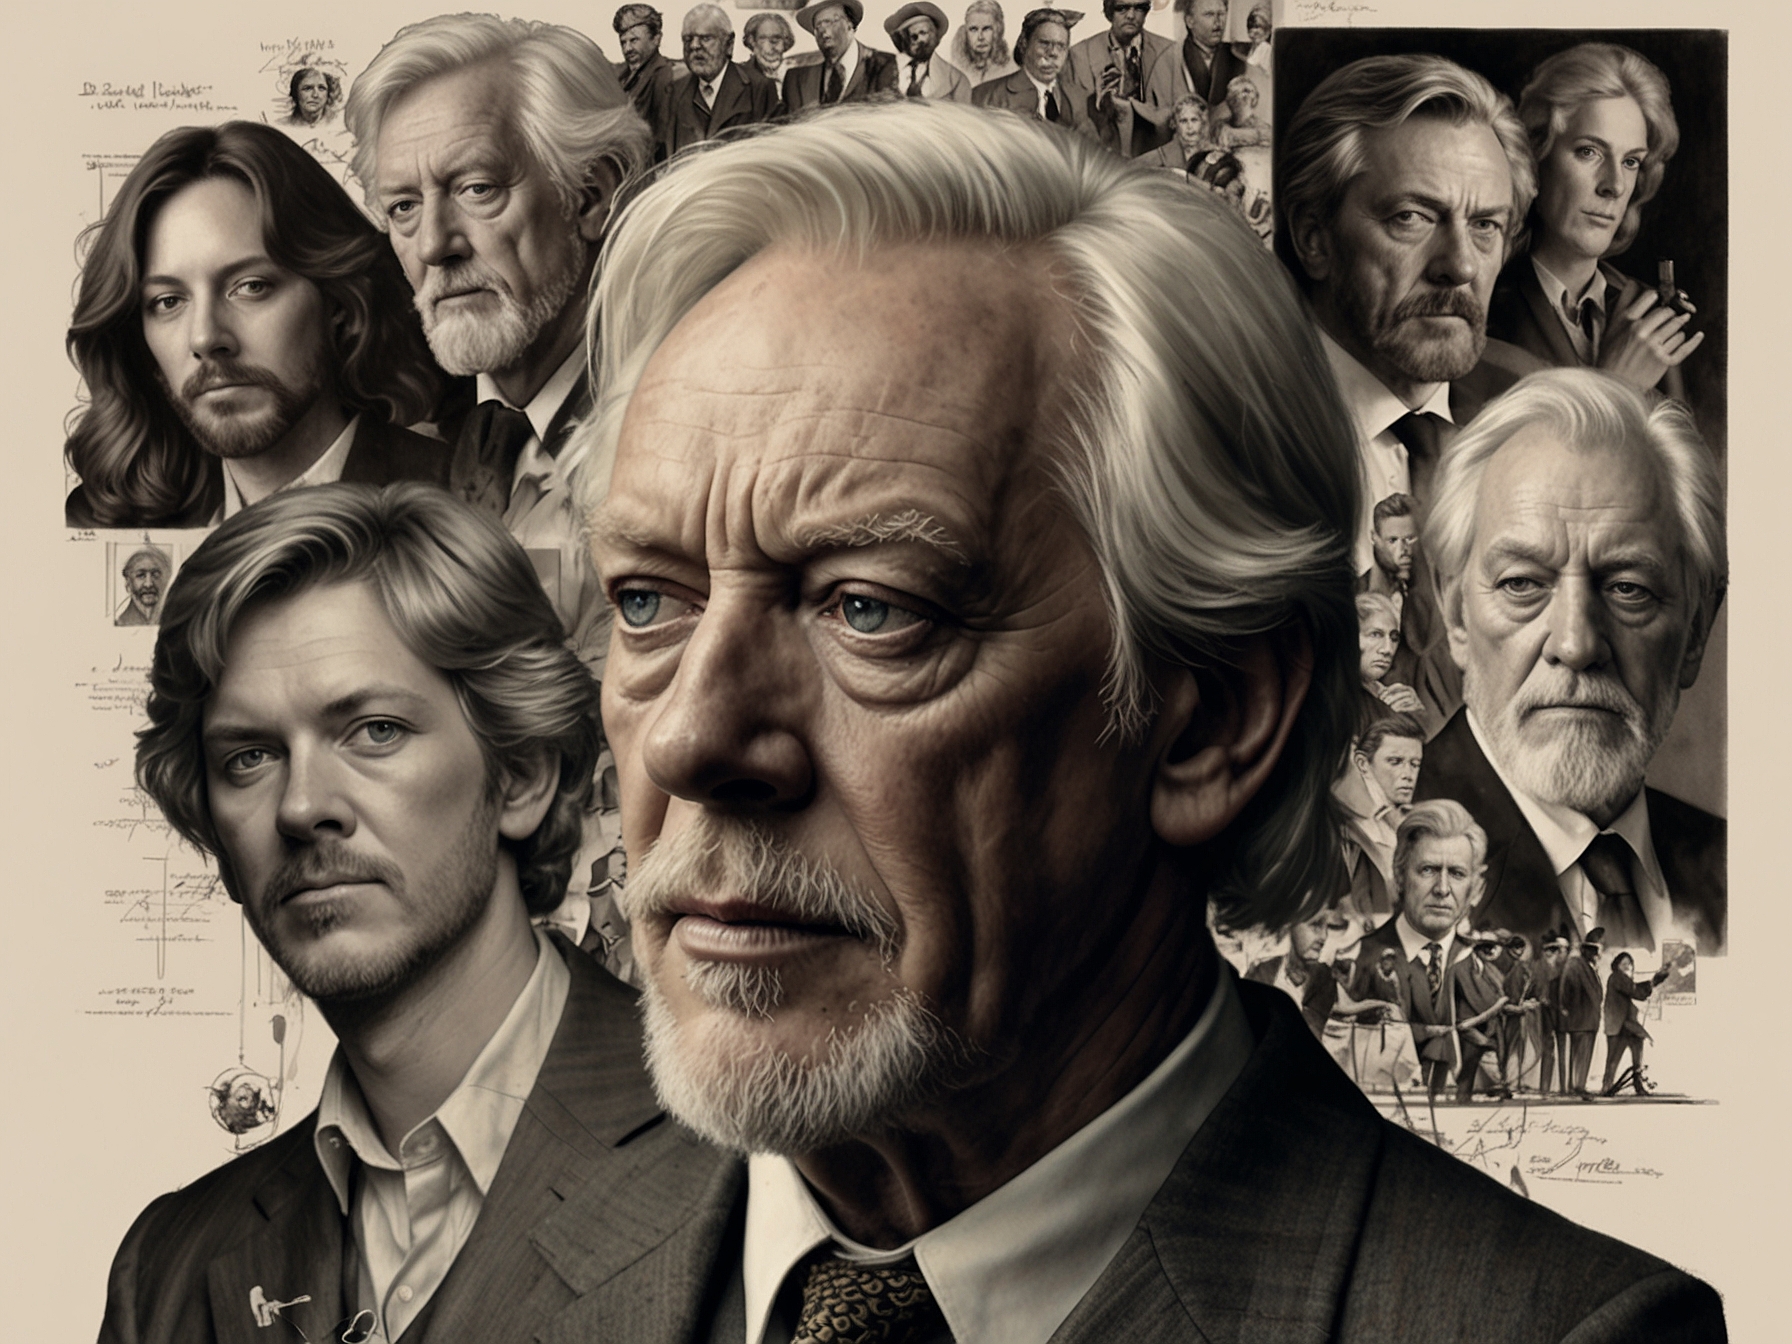 A collage of Donald Sutherland's iconic film roles, showcasing his versatility and talent across different genres, from war films to psychological thrillers, demonstrating his impressive and enduring legacy as an actor.